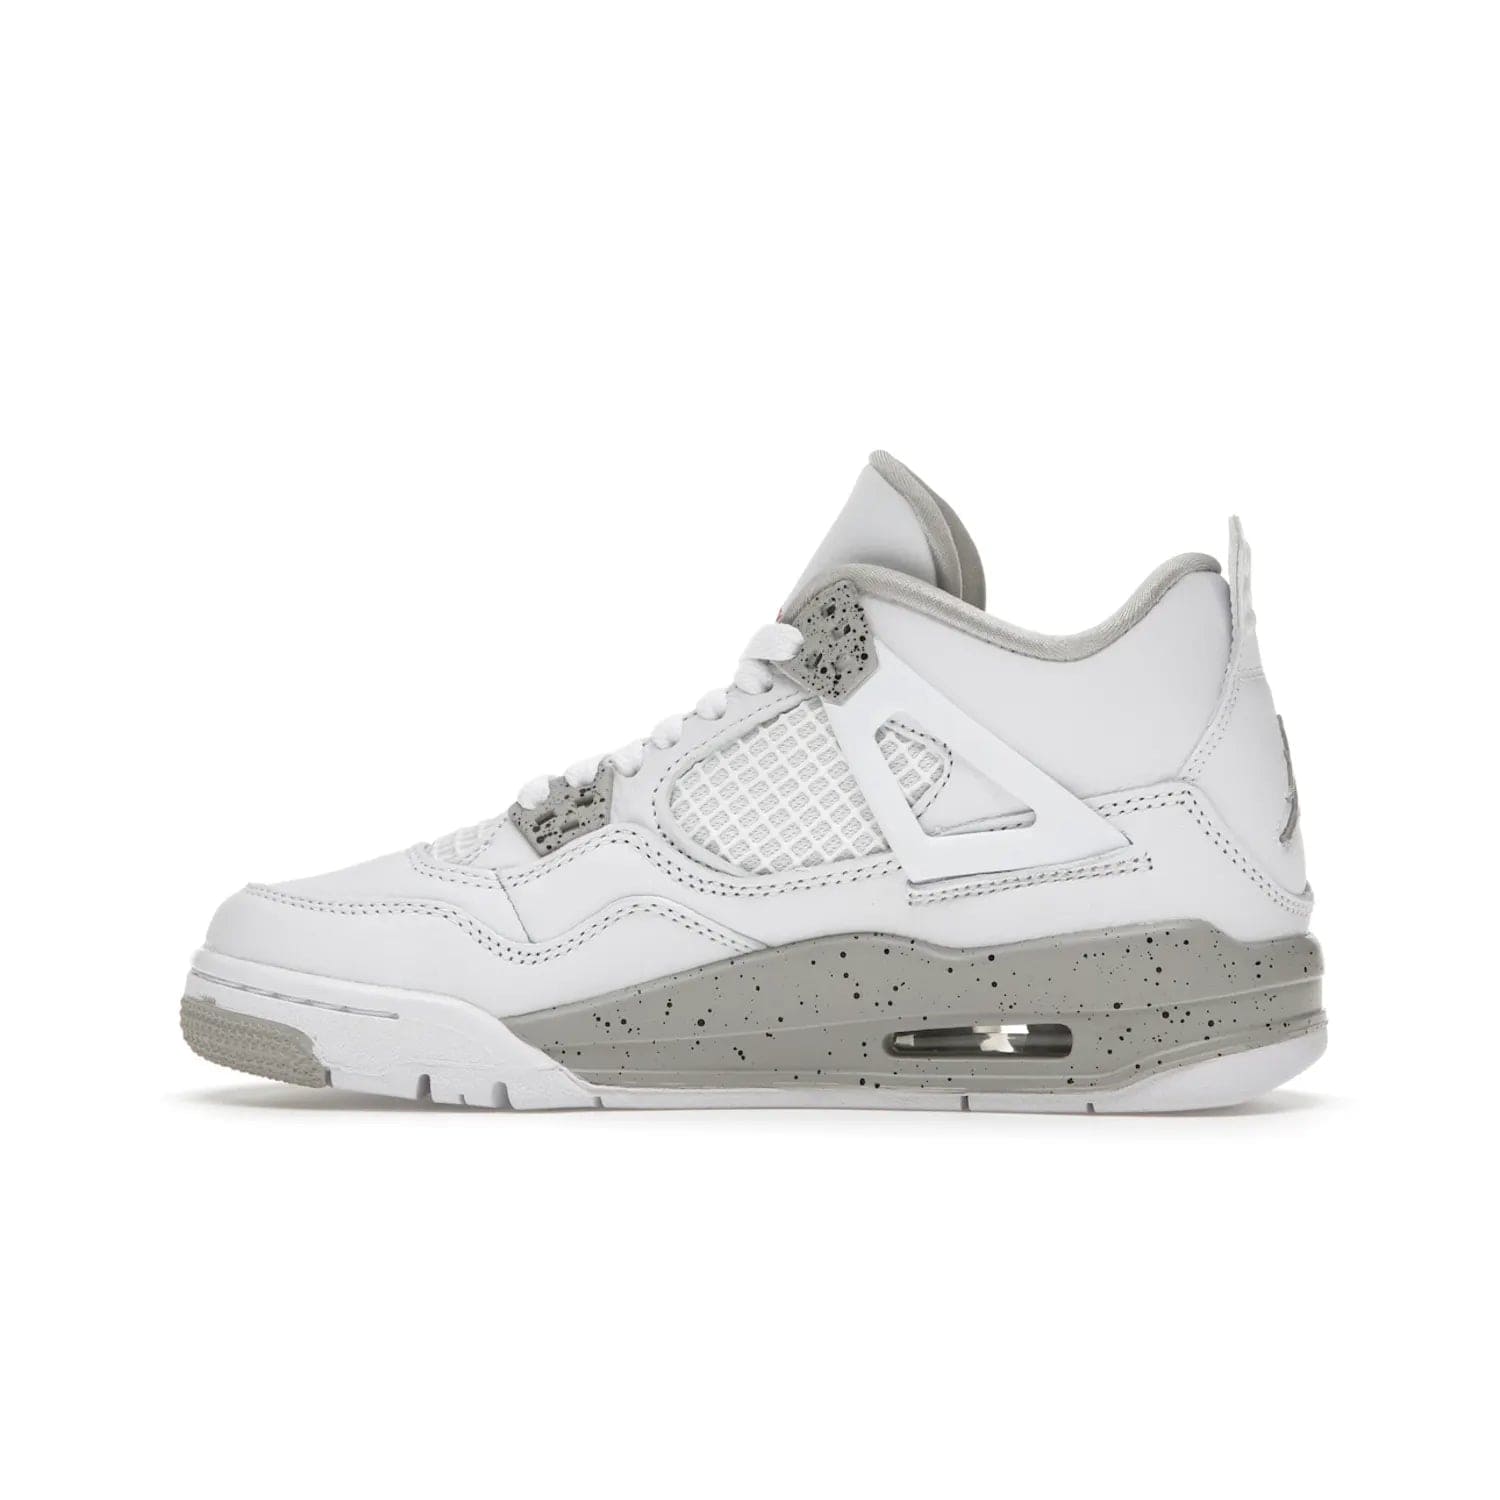 Jordan 4 Retro White Oreo (2021) (GS) - Image 20 - Only at www.BallersClubKickz.com - White Oreo Air Jordan 4 Retro 2021 GS - Iconic sneaker silhouette with white canvas upper, Tech Grey detailing, and Fire Red accents. Available July 2021.